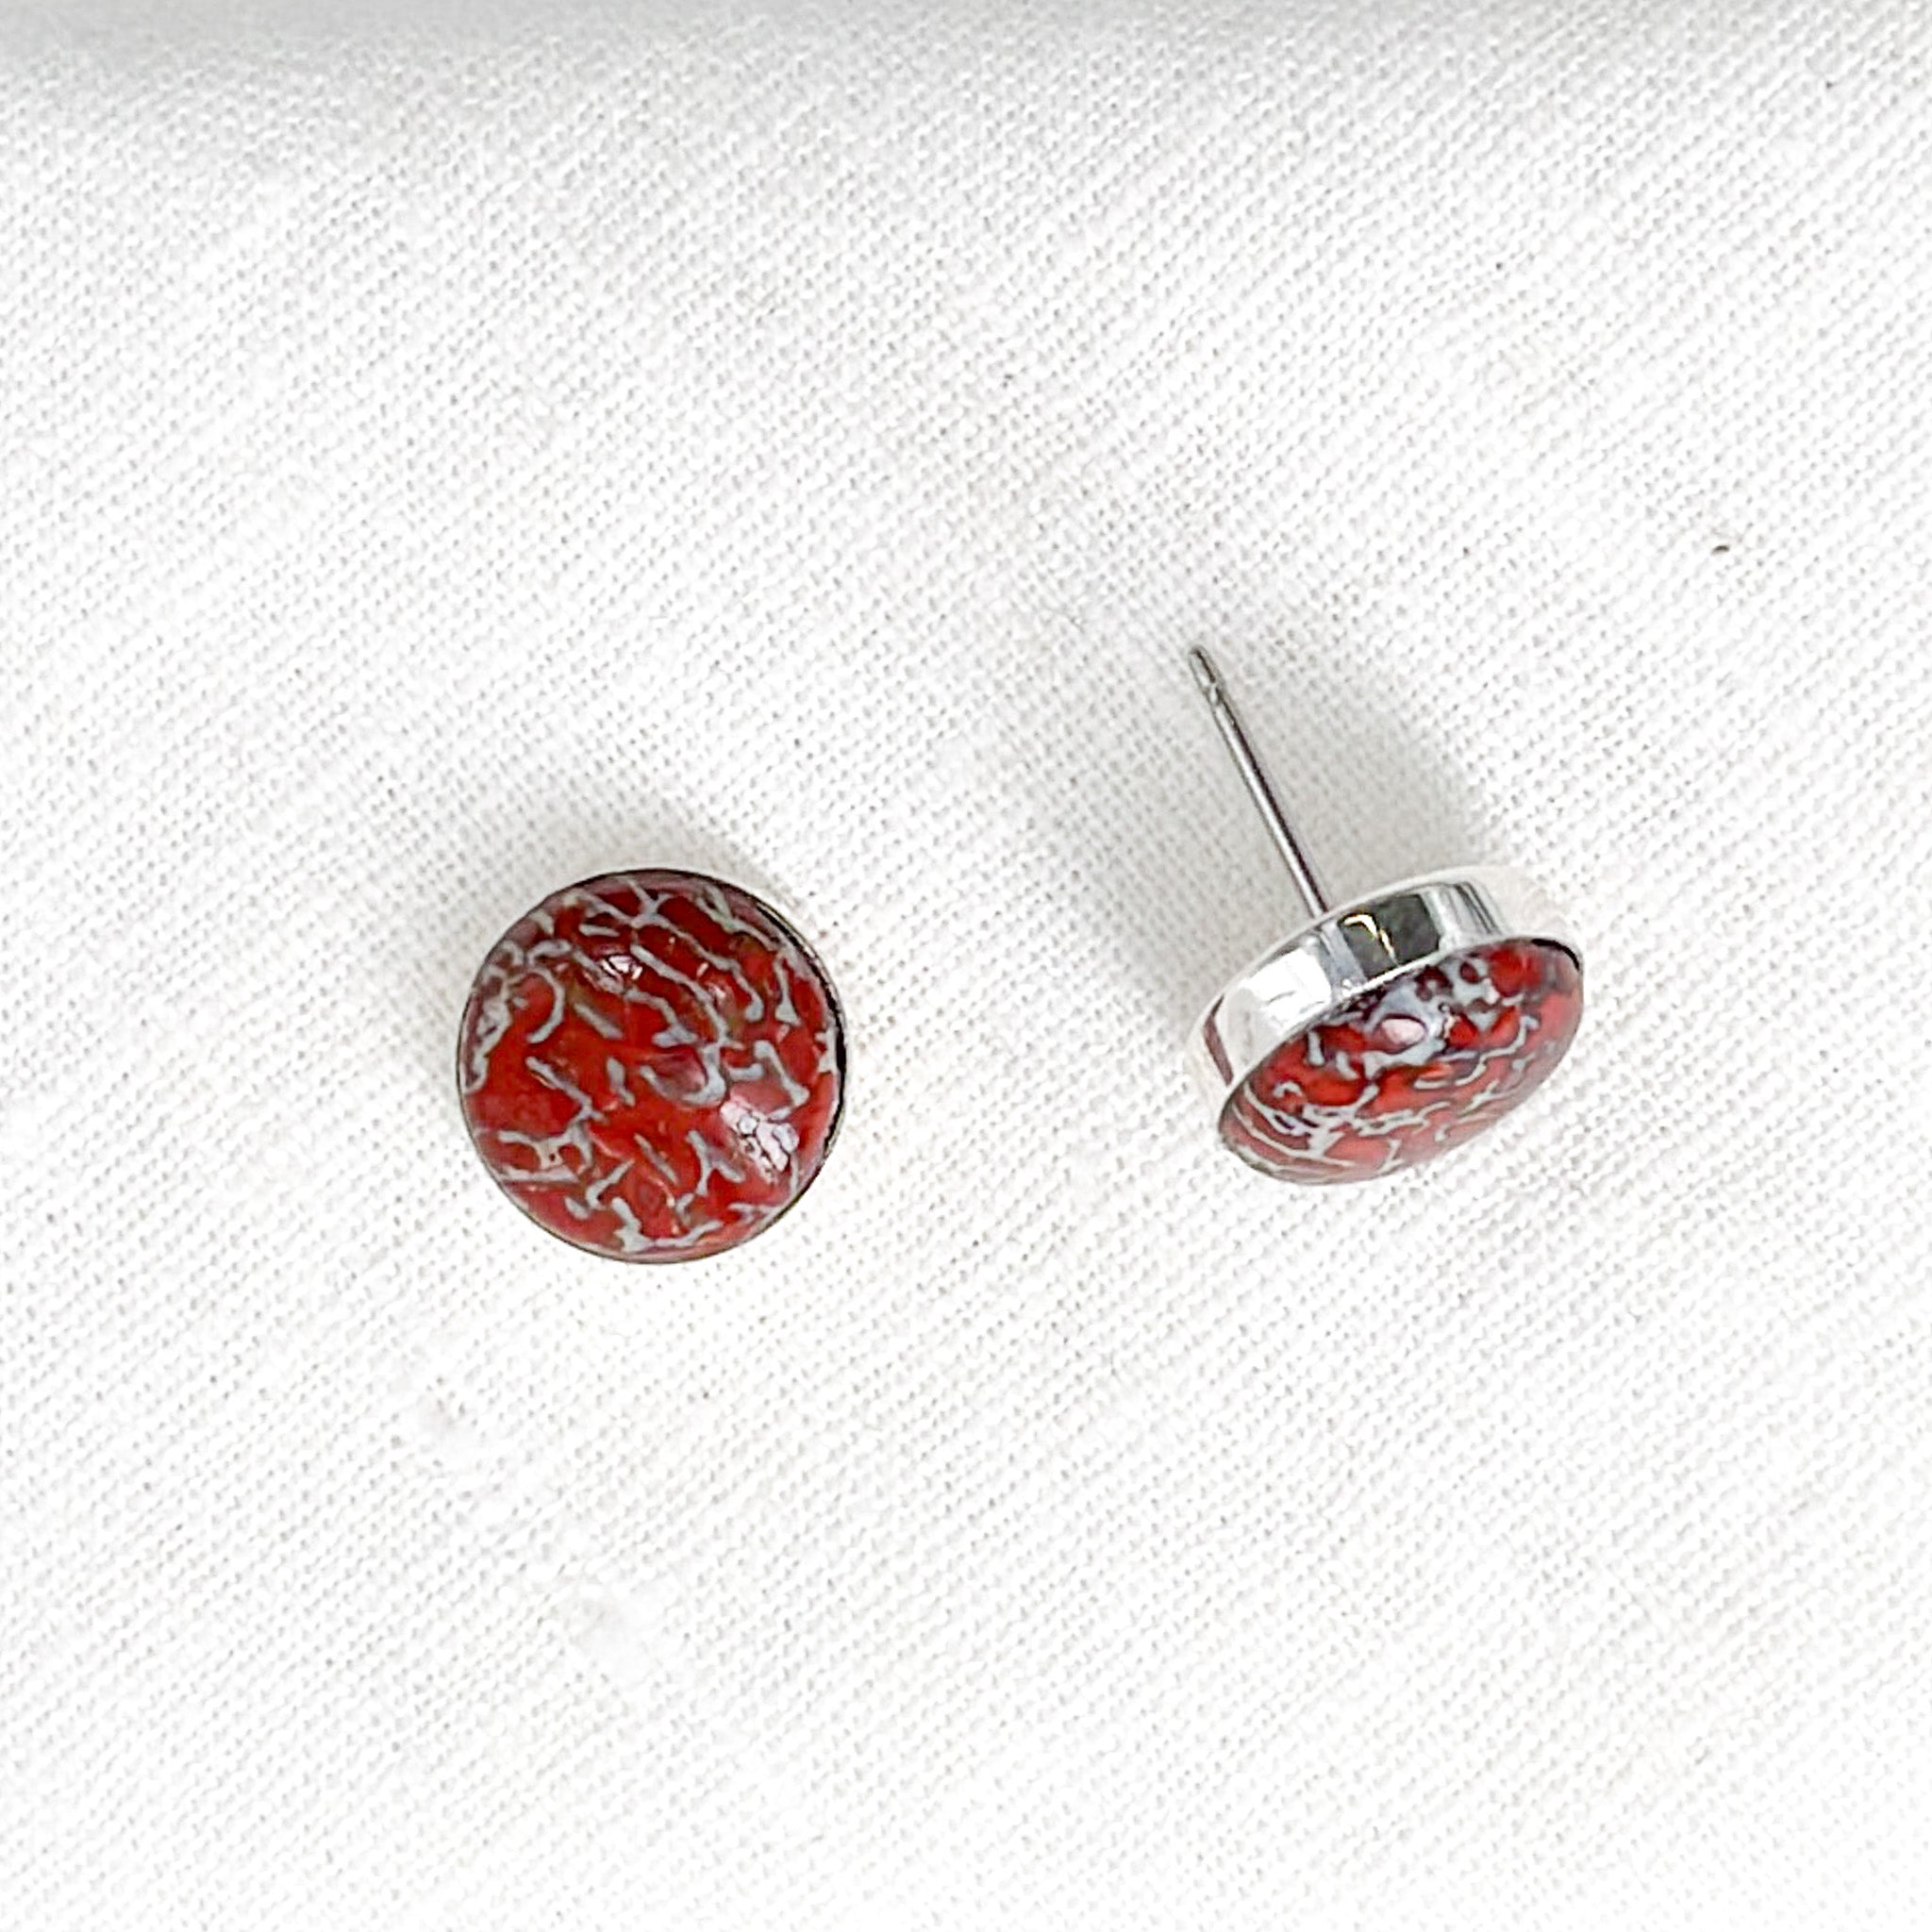 Small Confluence Stud Earrings with 8mm red fossilized dinosaur bone collected in Colorado